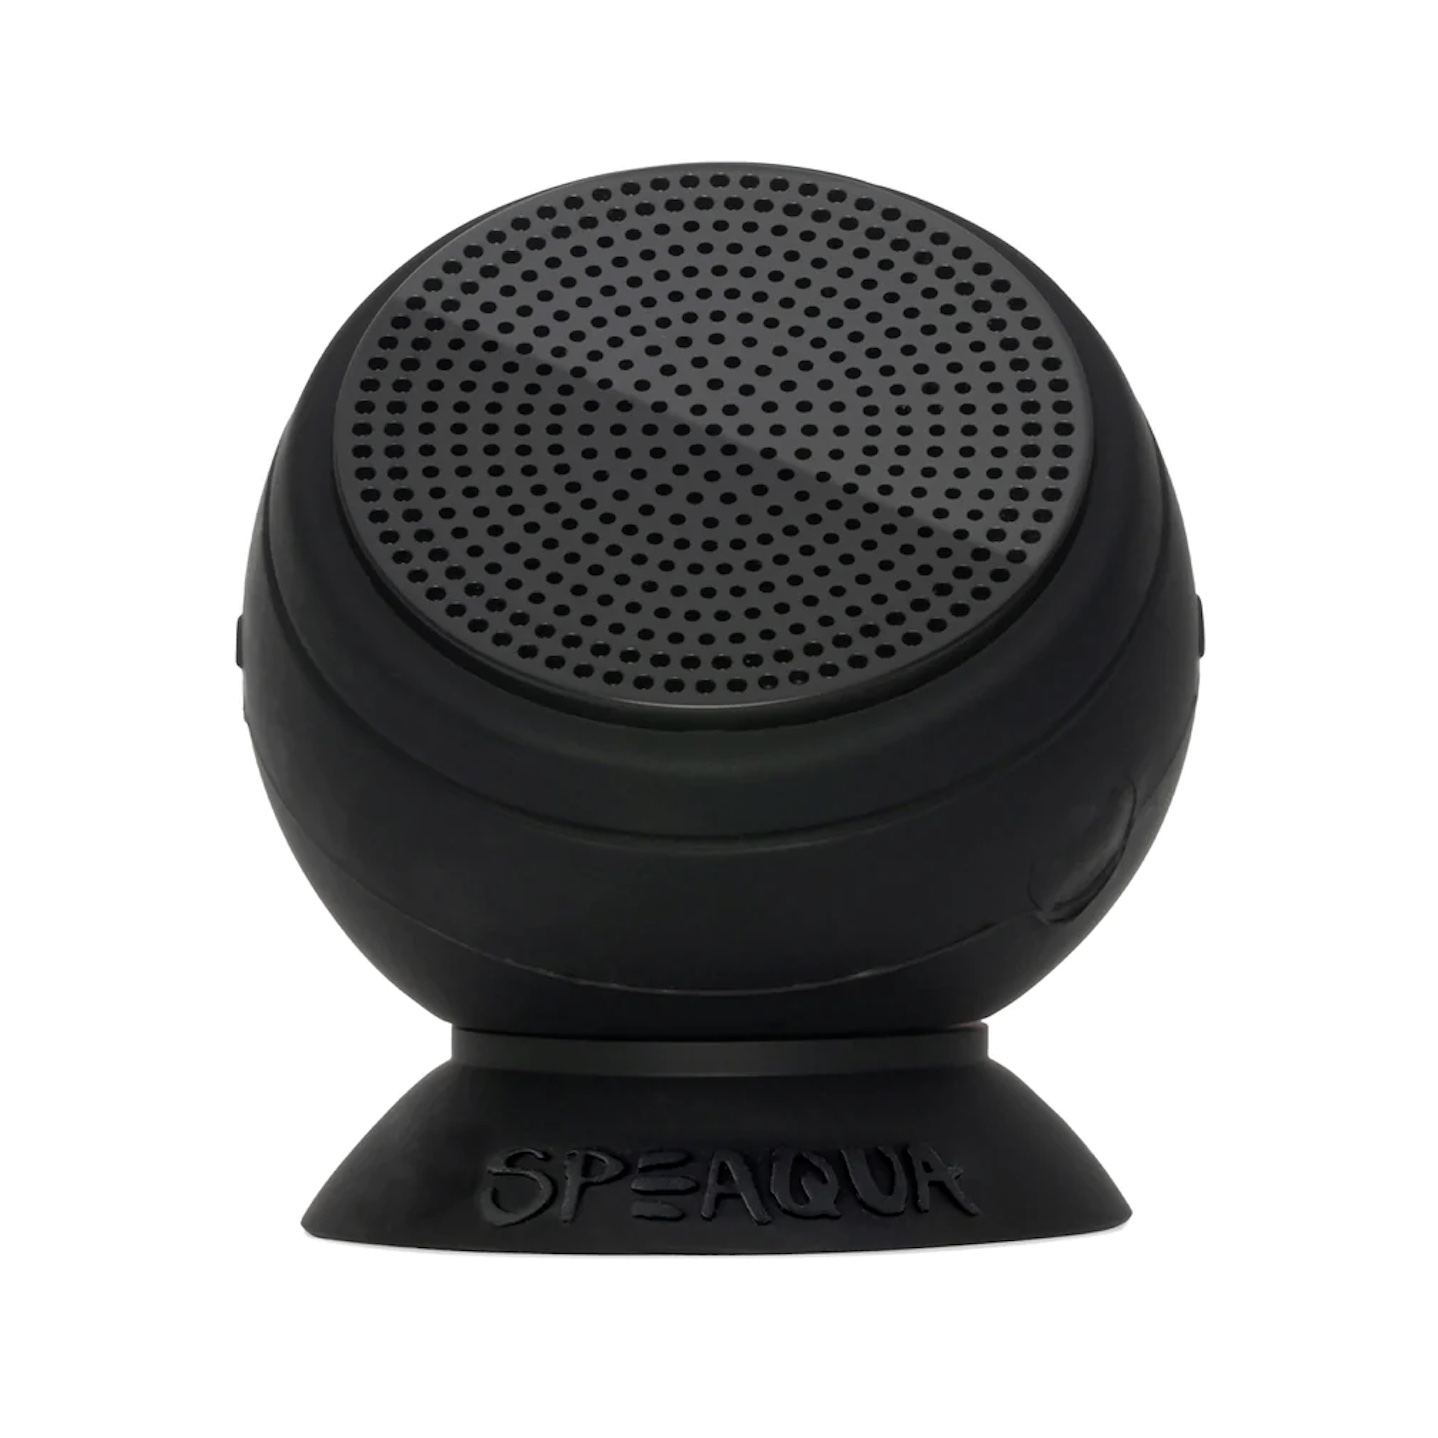 Give The Barnacle Pro Waterproof Speaker from Speaqua as a gift